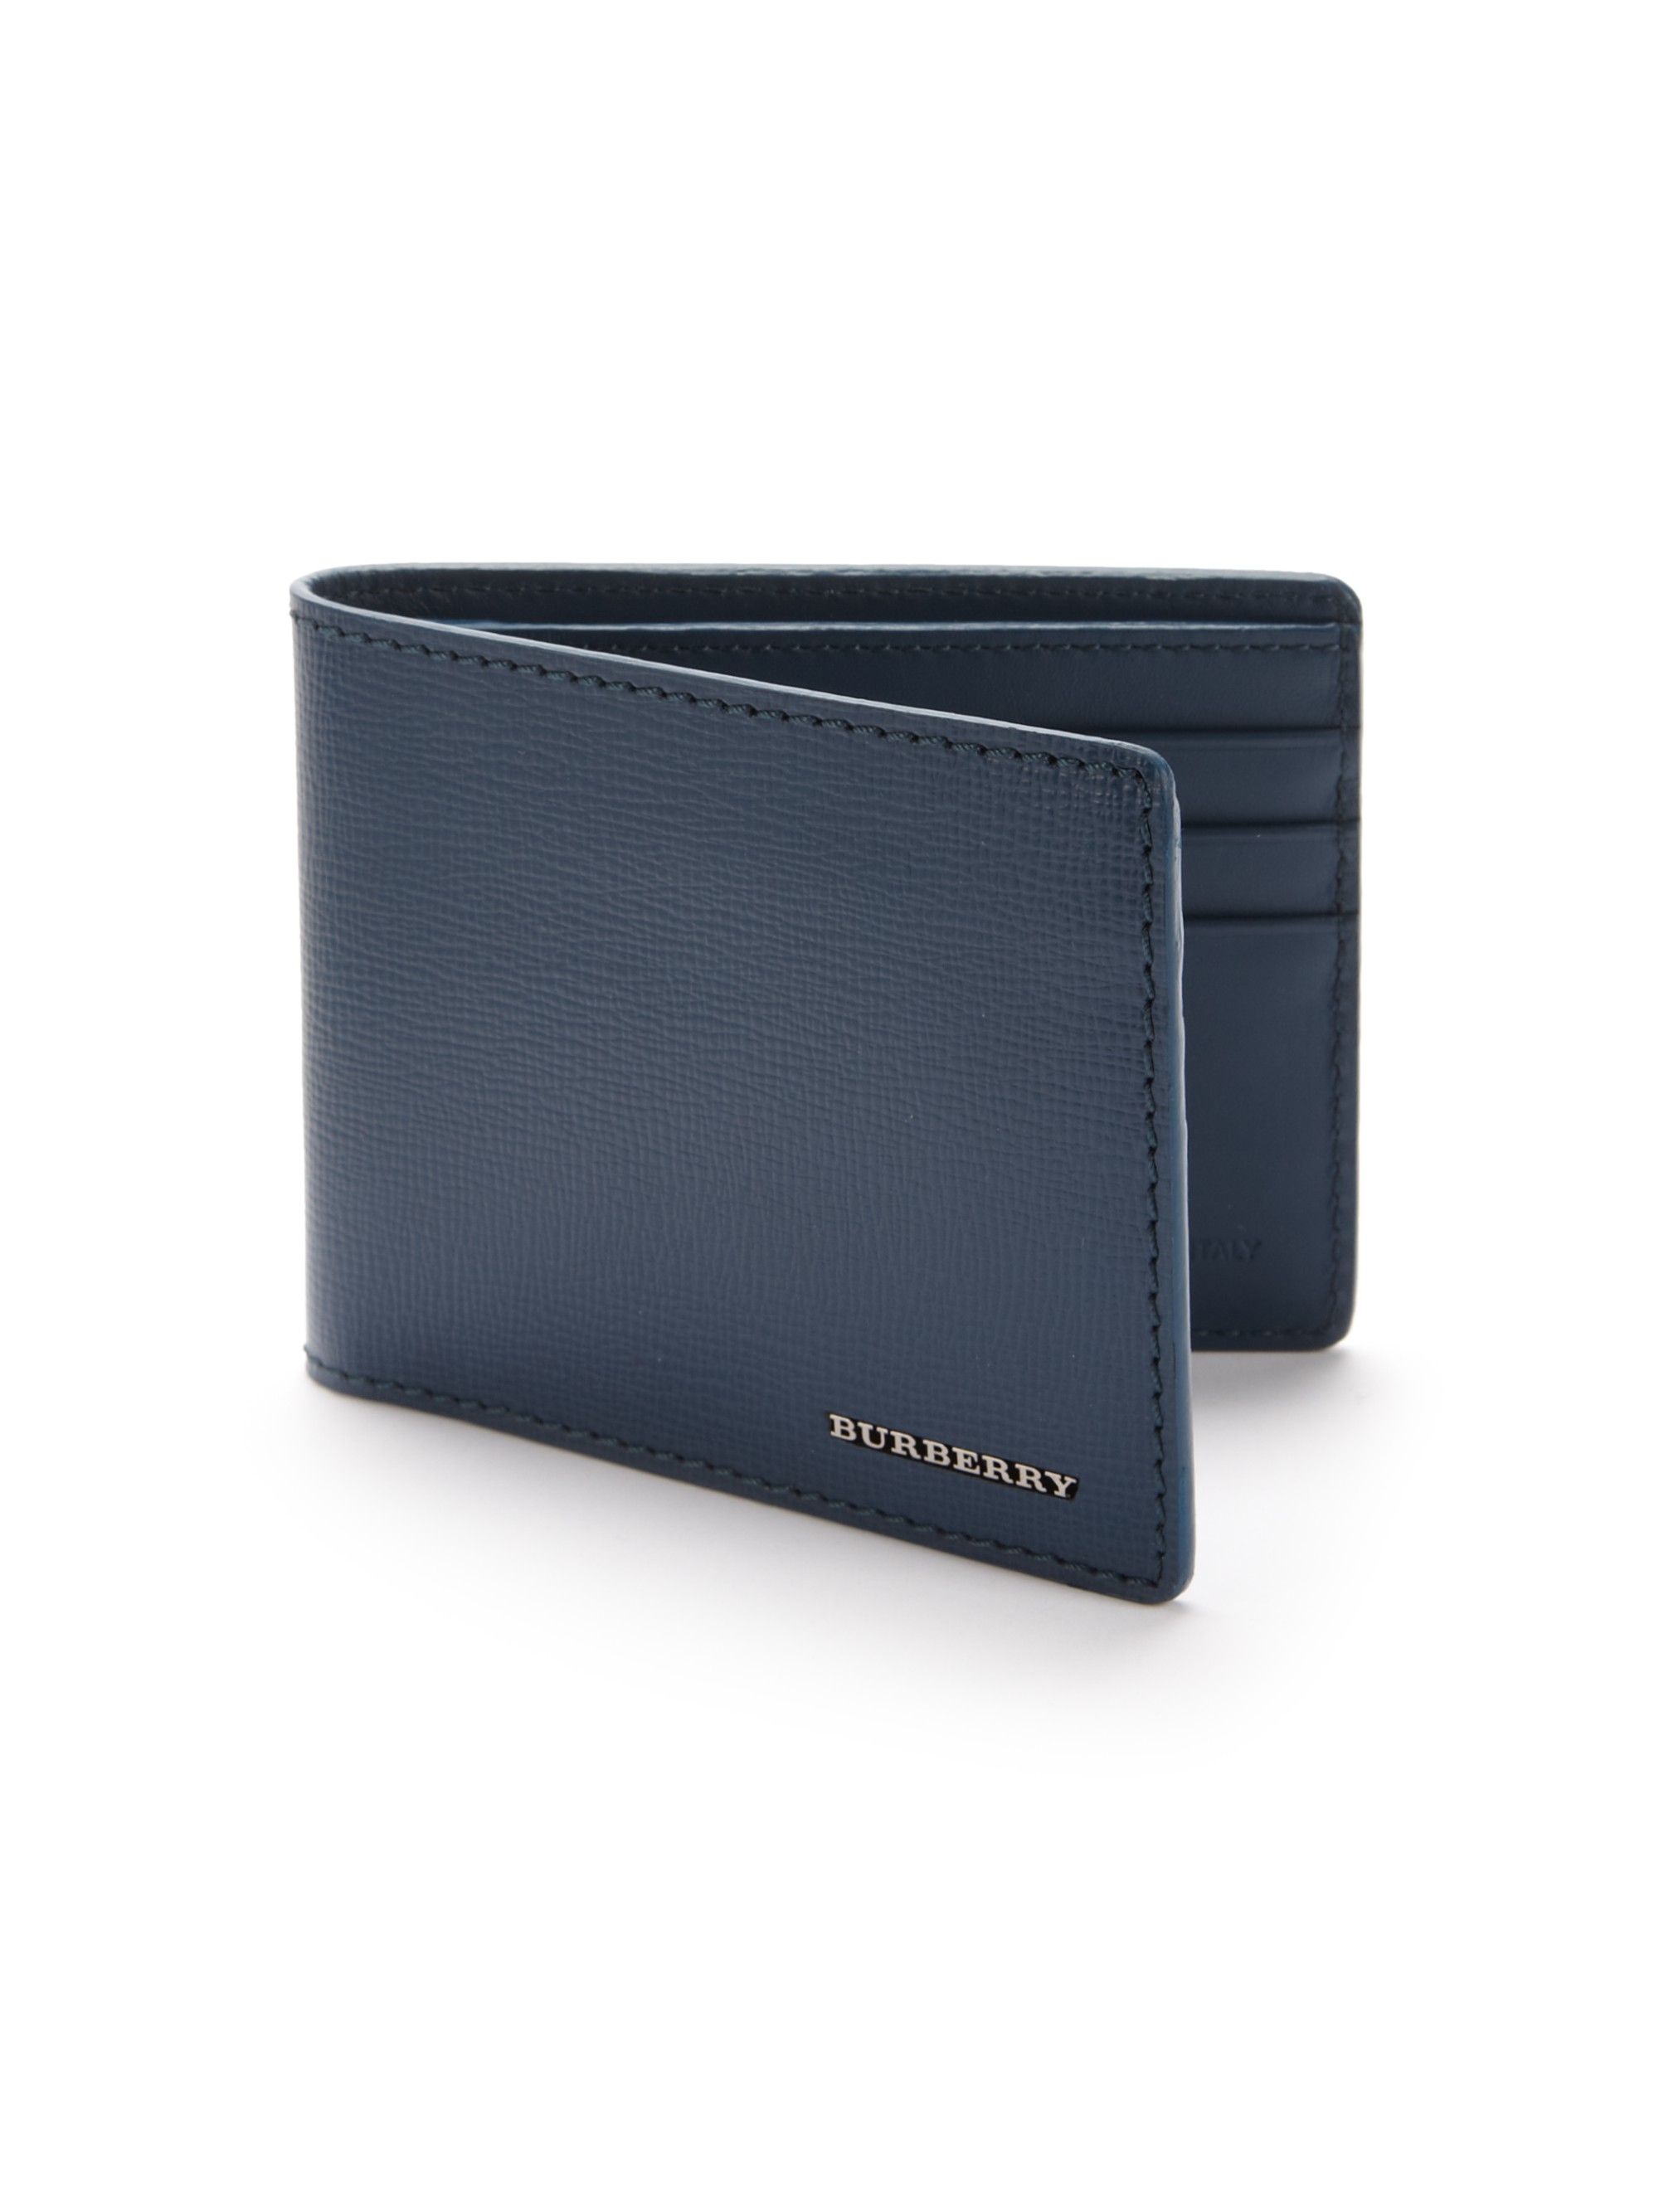 Burberry Check Money Clip Wallet Leather Accessories | Heathrow Reserve & Collect